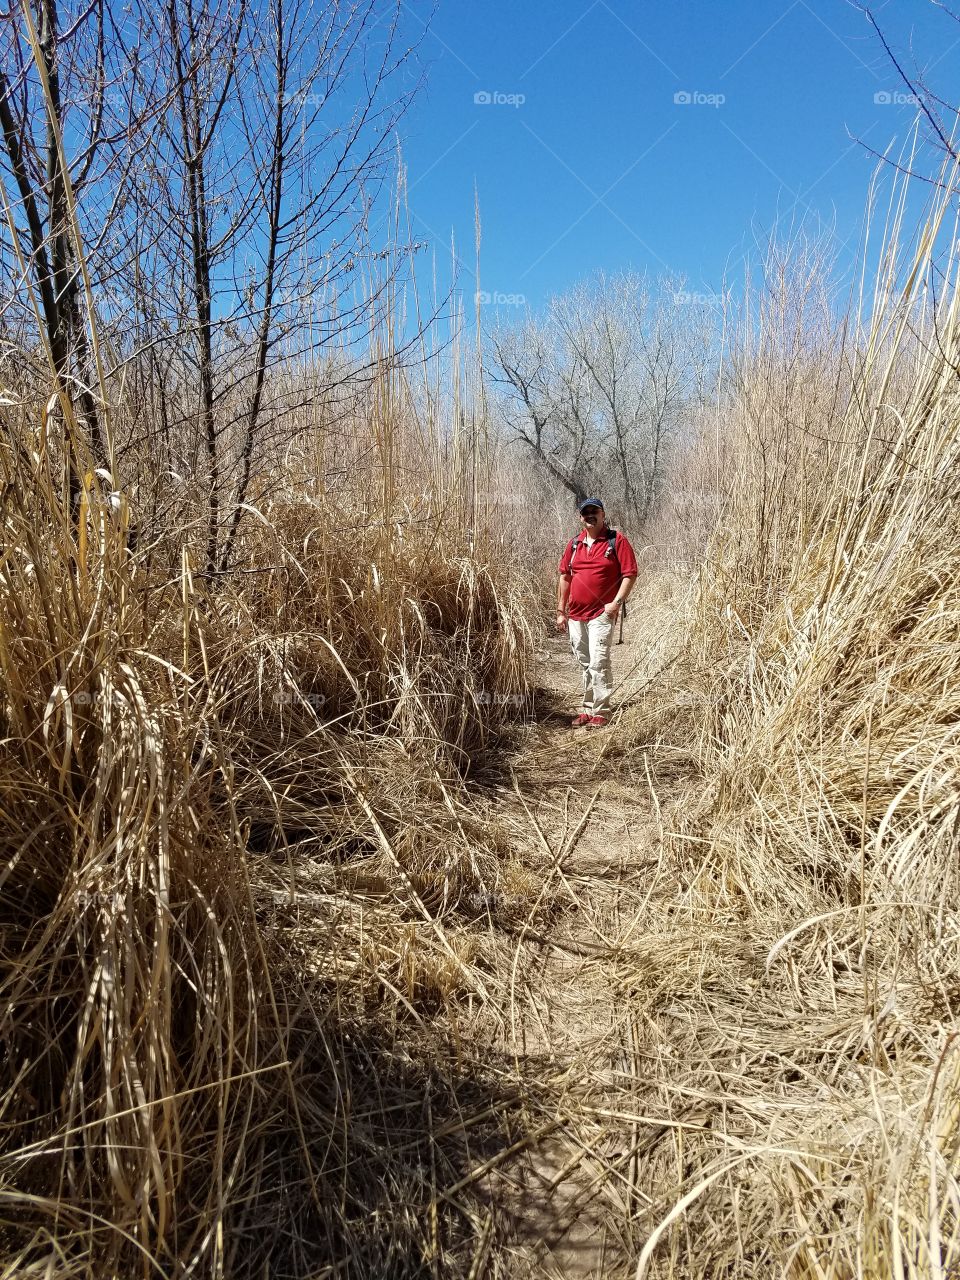 Hiking In the Bosque